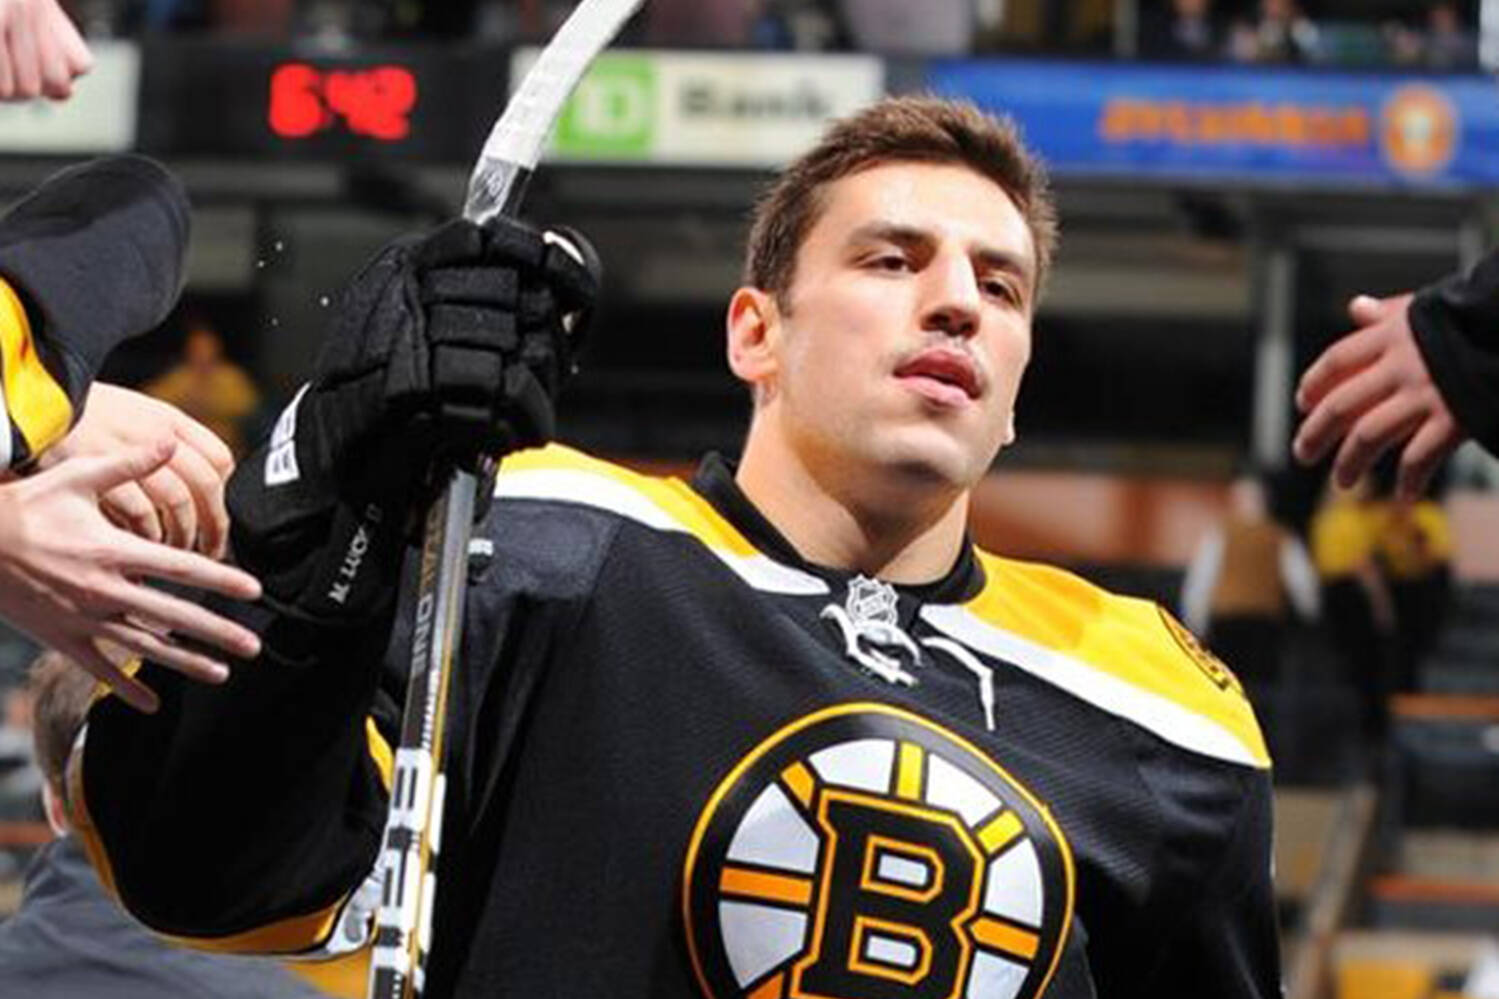 Milan Lucic during his first stint as Bruin from 2007-2015. NHL.com photo